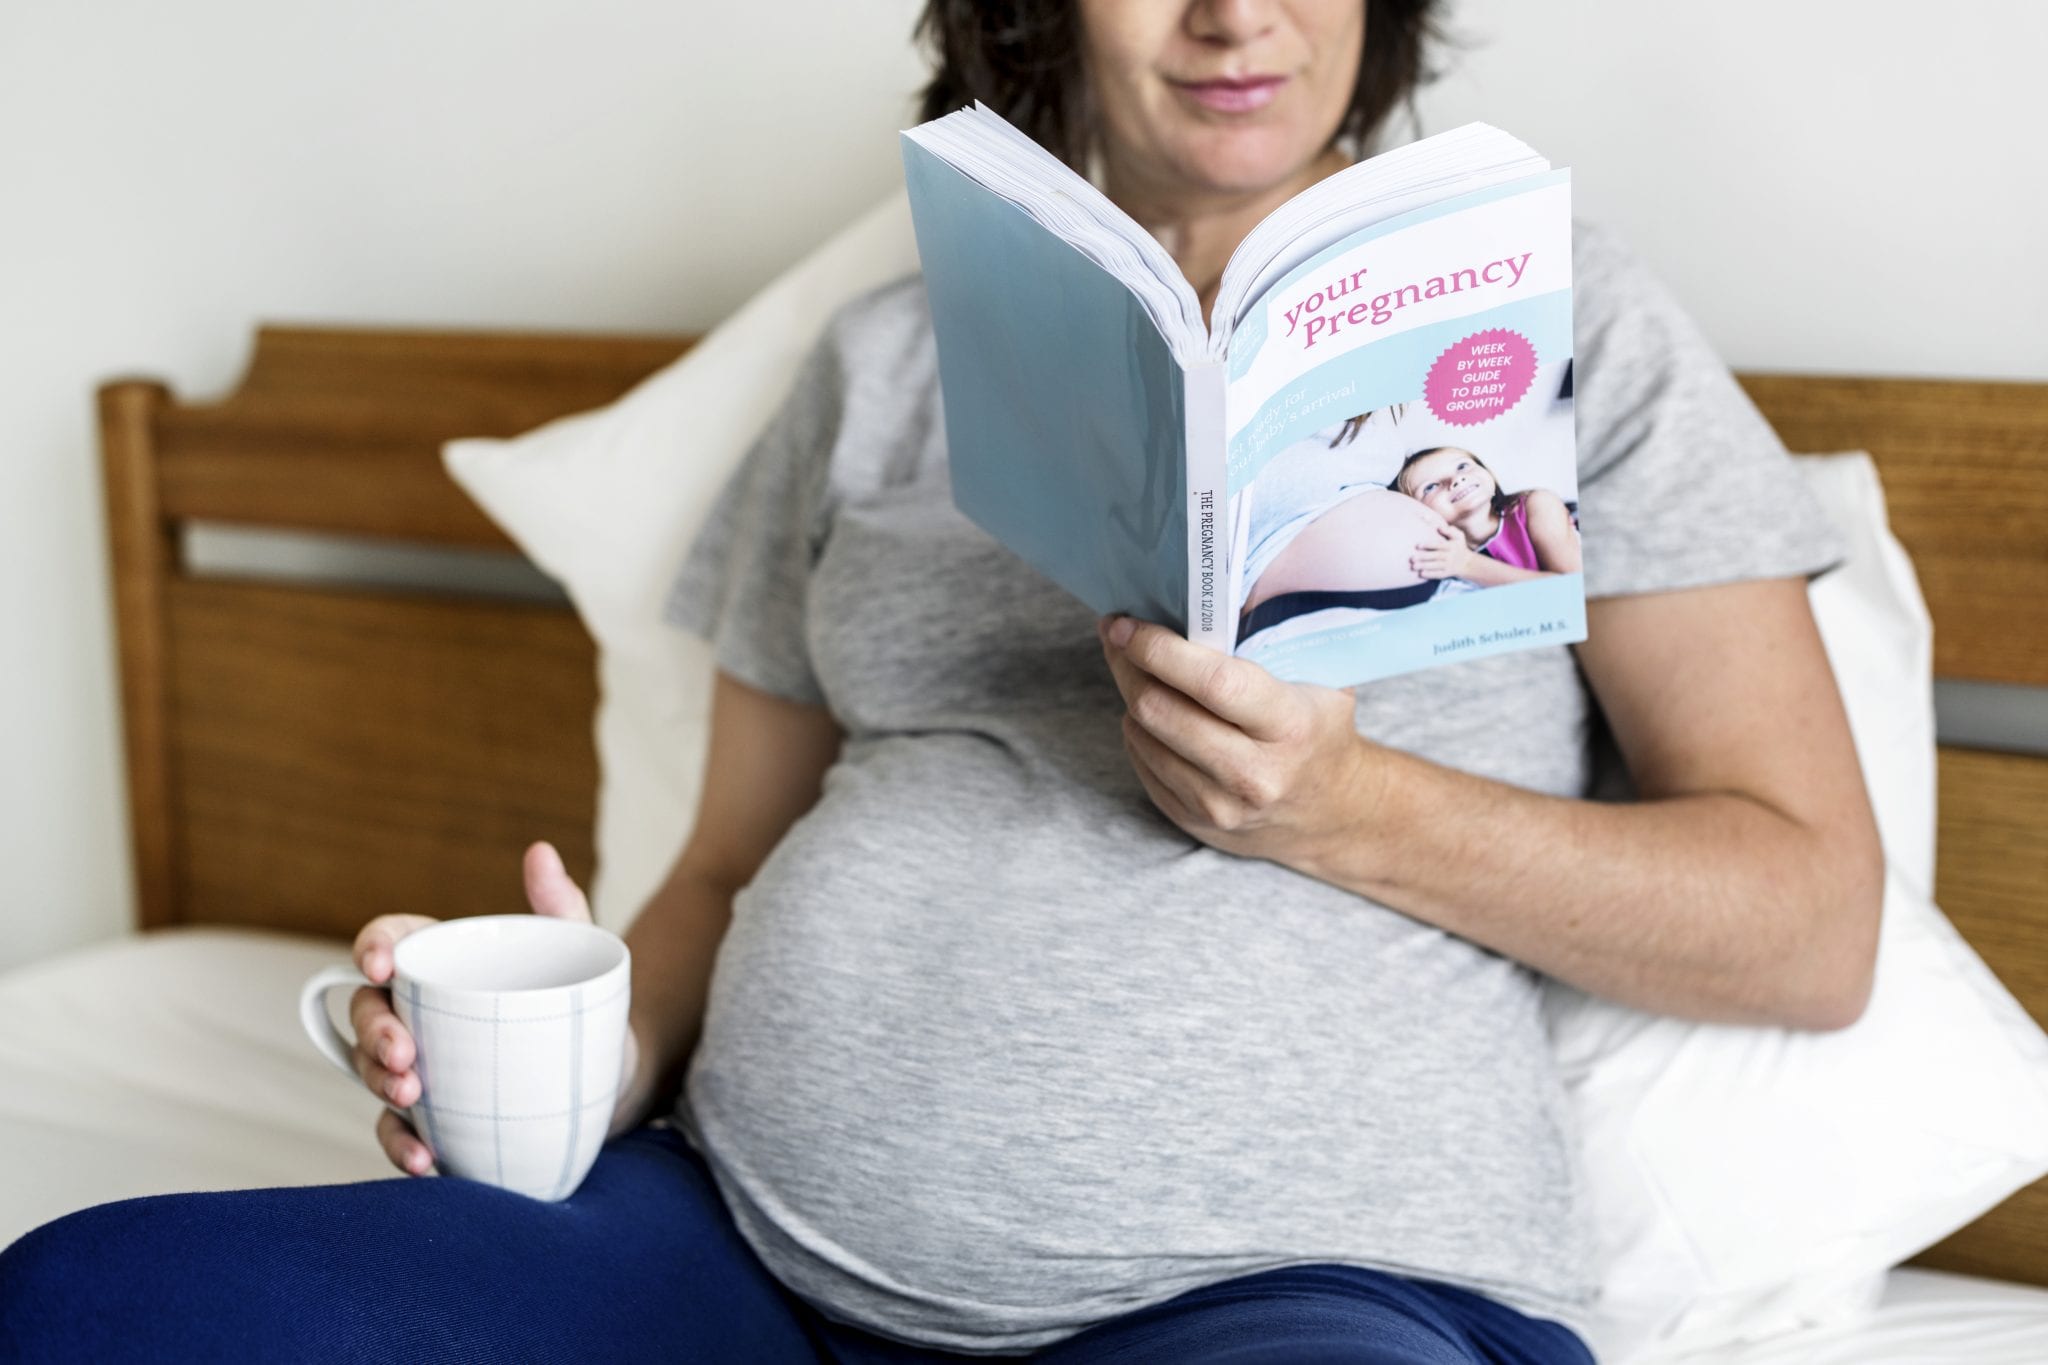 15 Third Trimester Must-Haves for Your Pregnancy